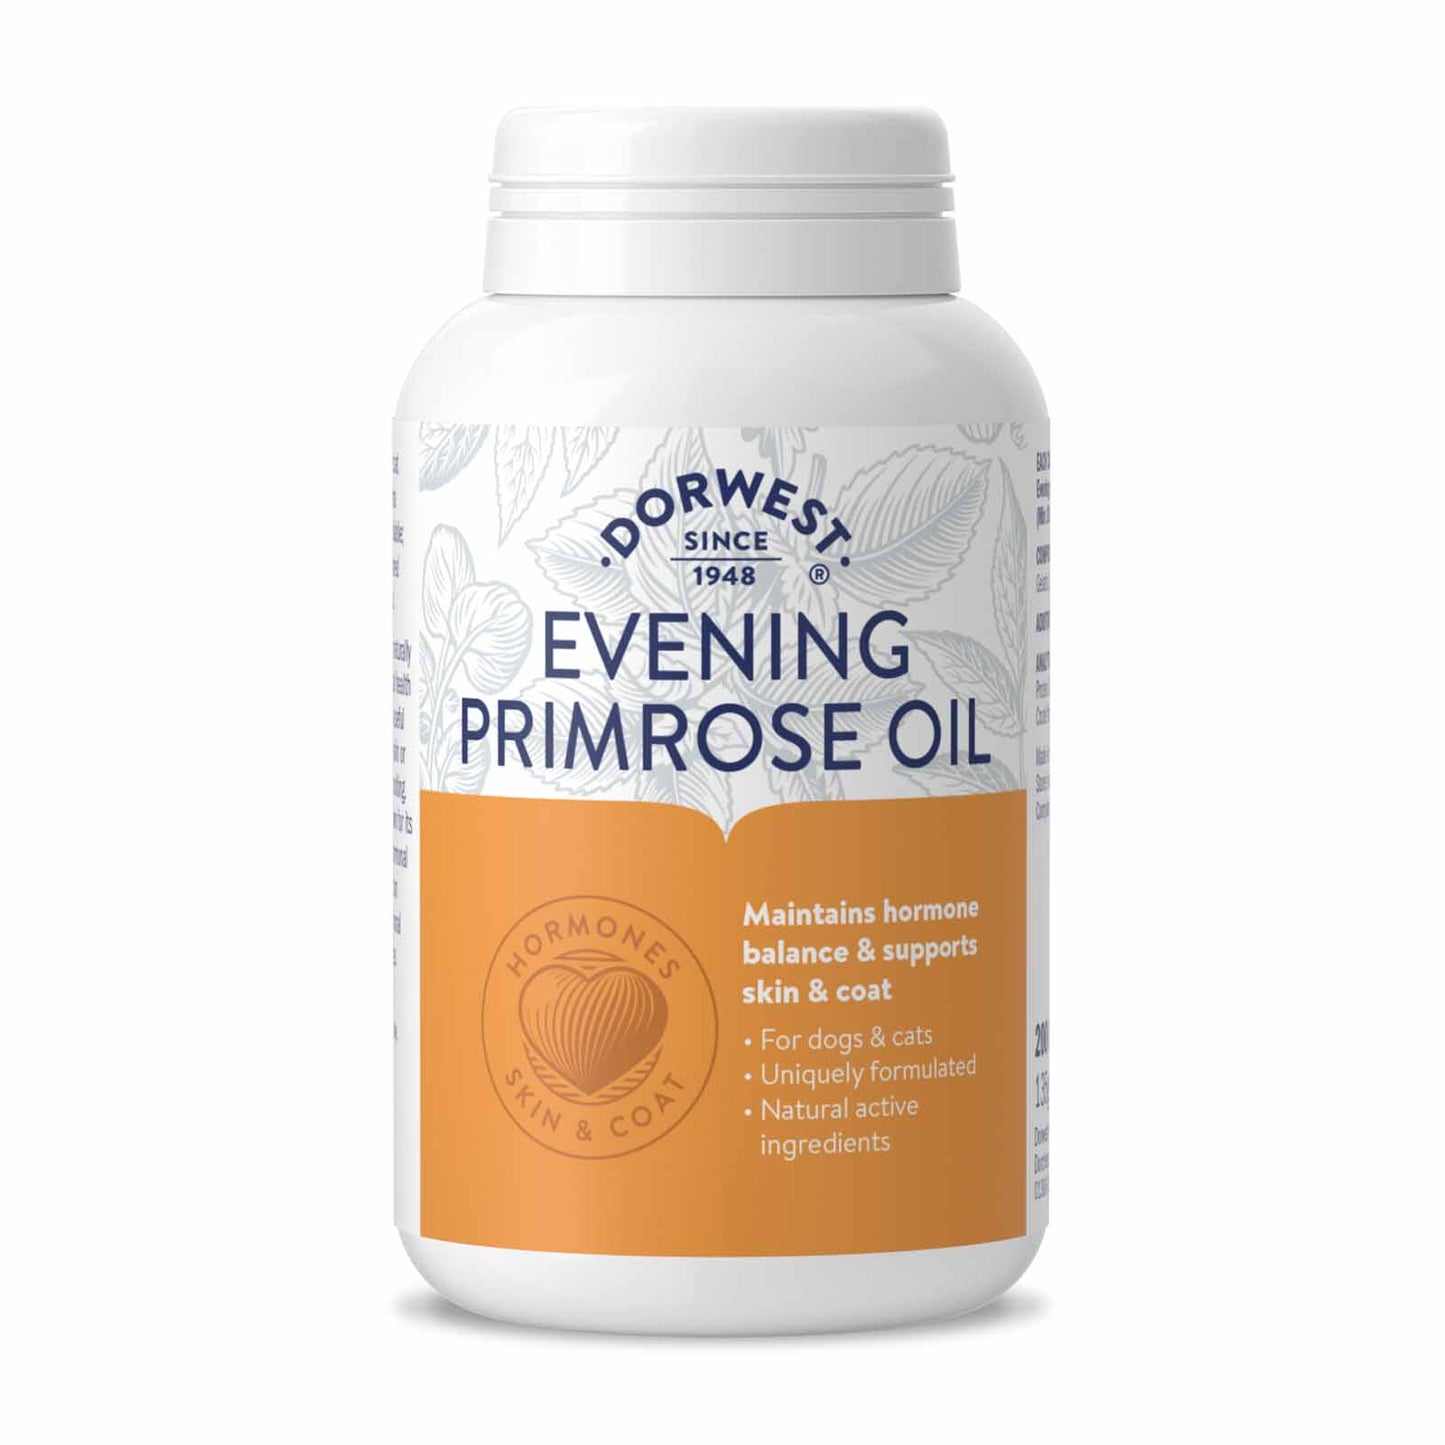 Evening Primrose Oil Capsules For Dogs And Cats (Healthy Skin & Hormonal Balance)